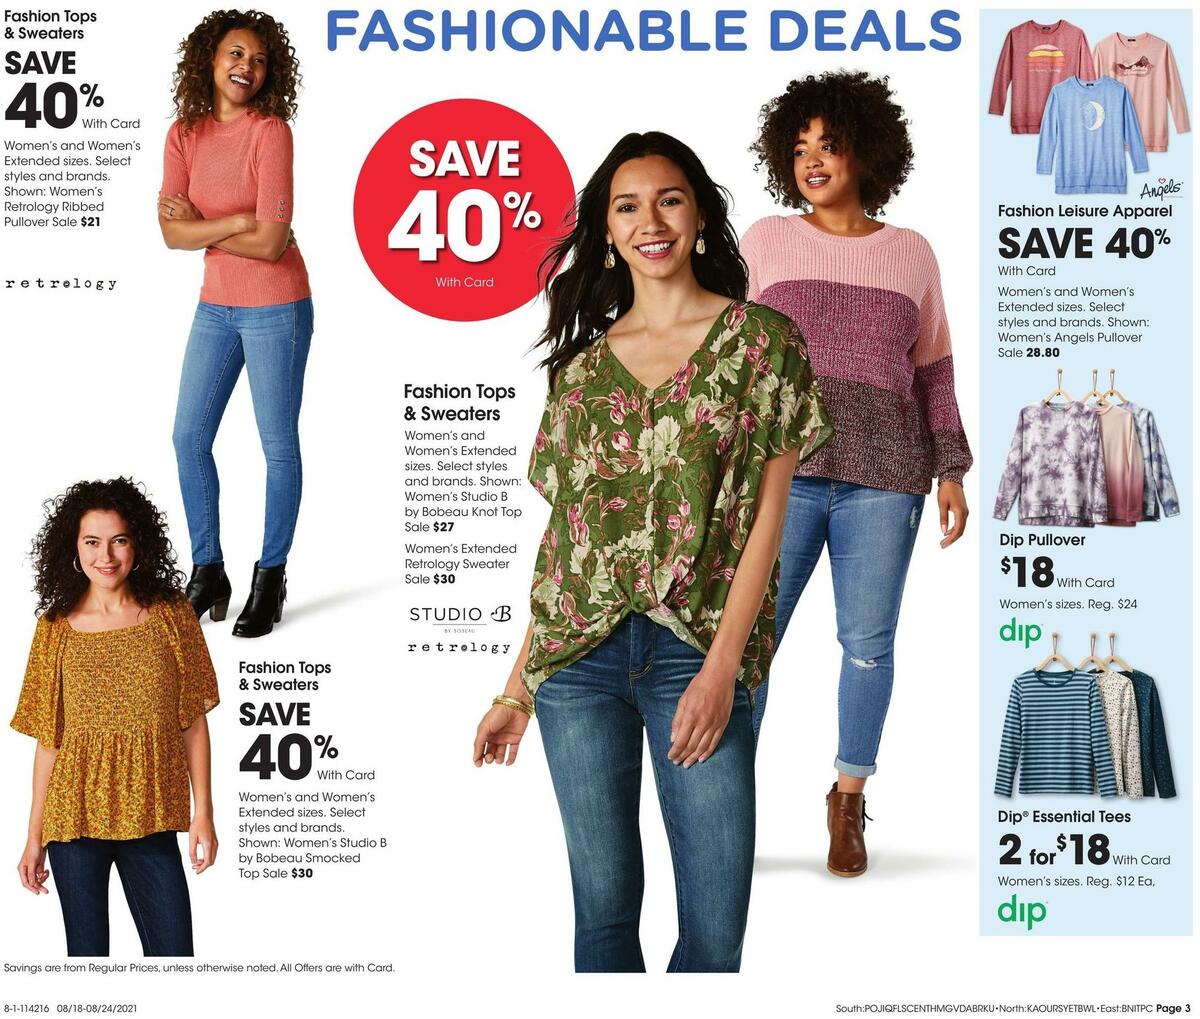 Fred Meyer General Merchandise Weekly Ad from August 18